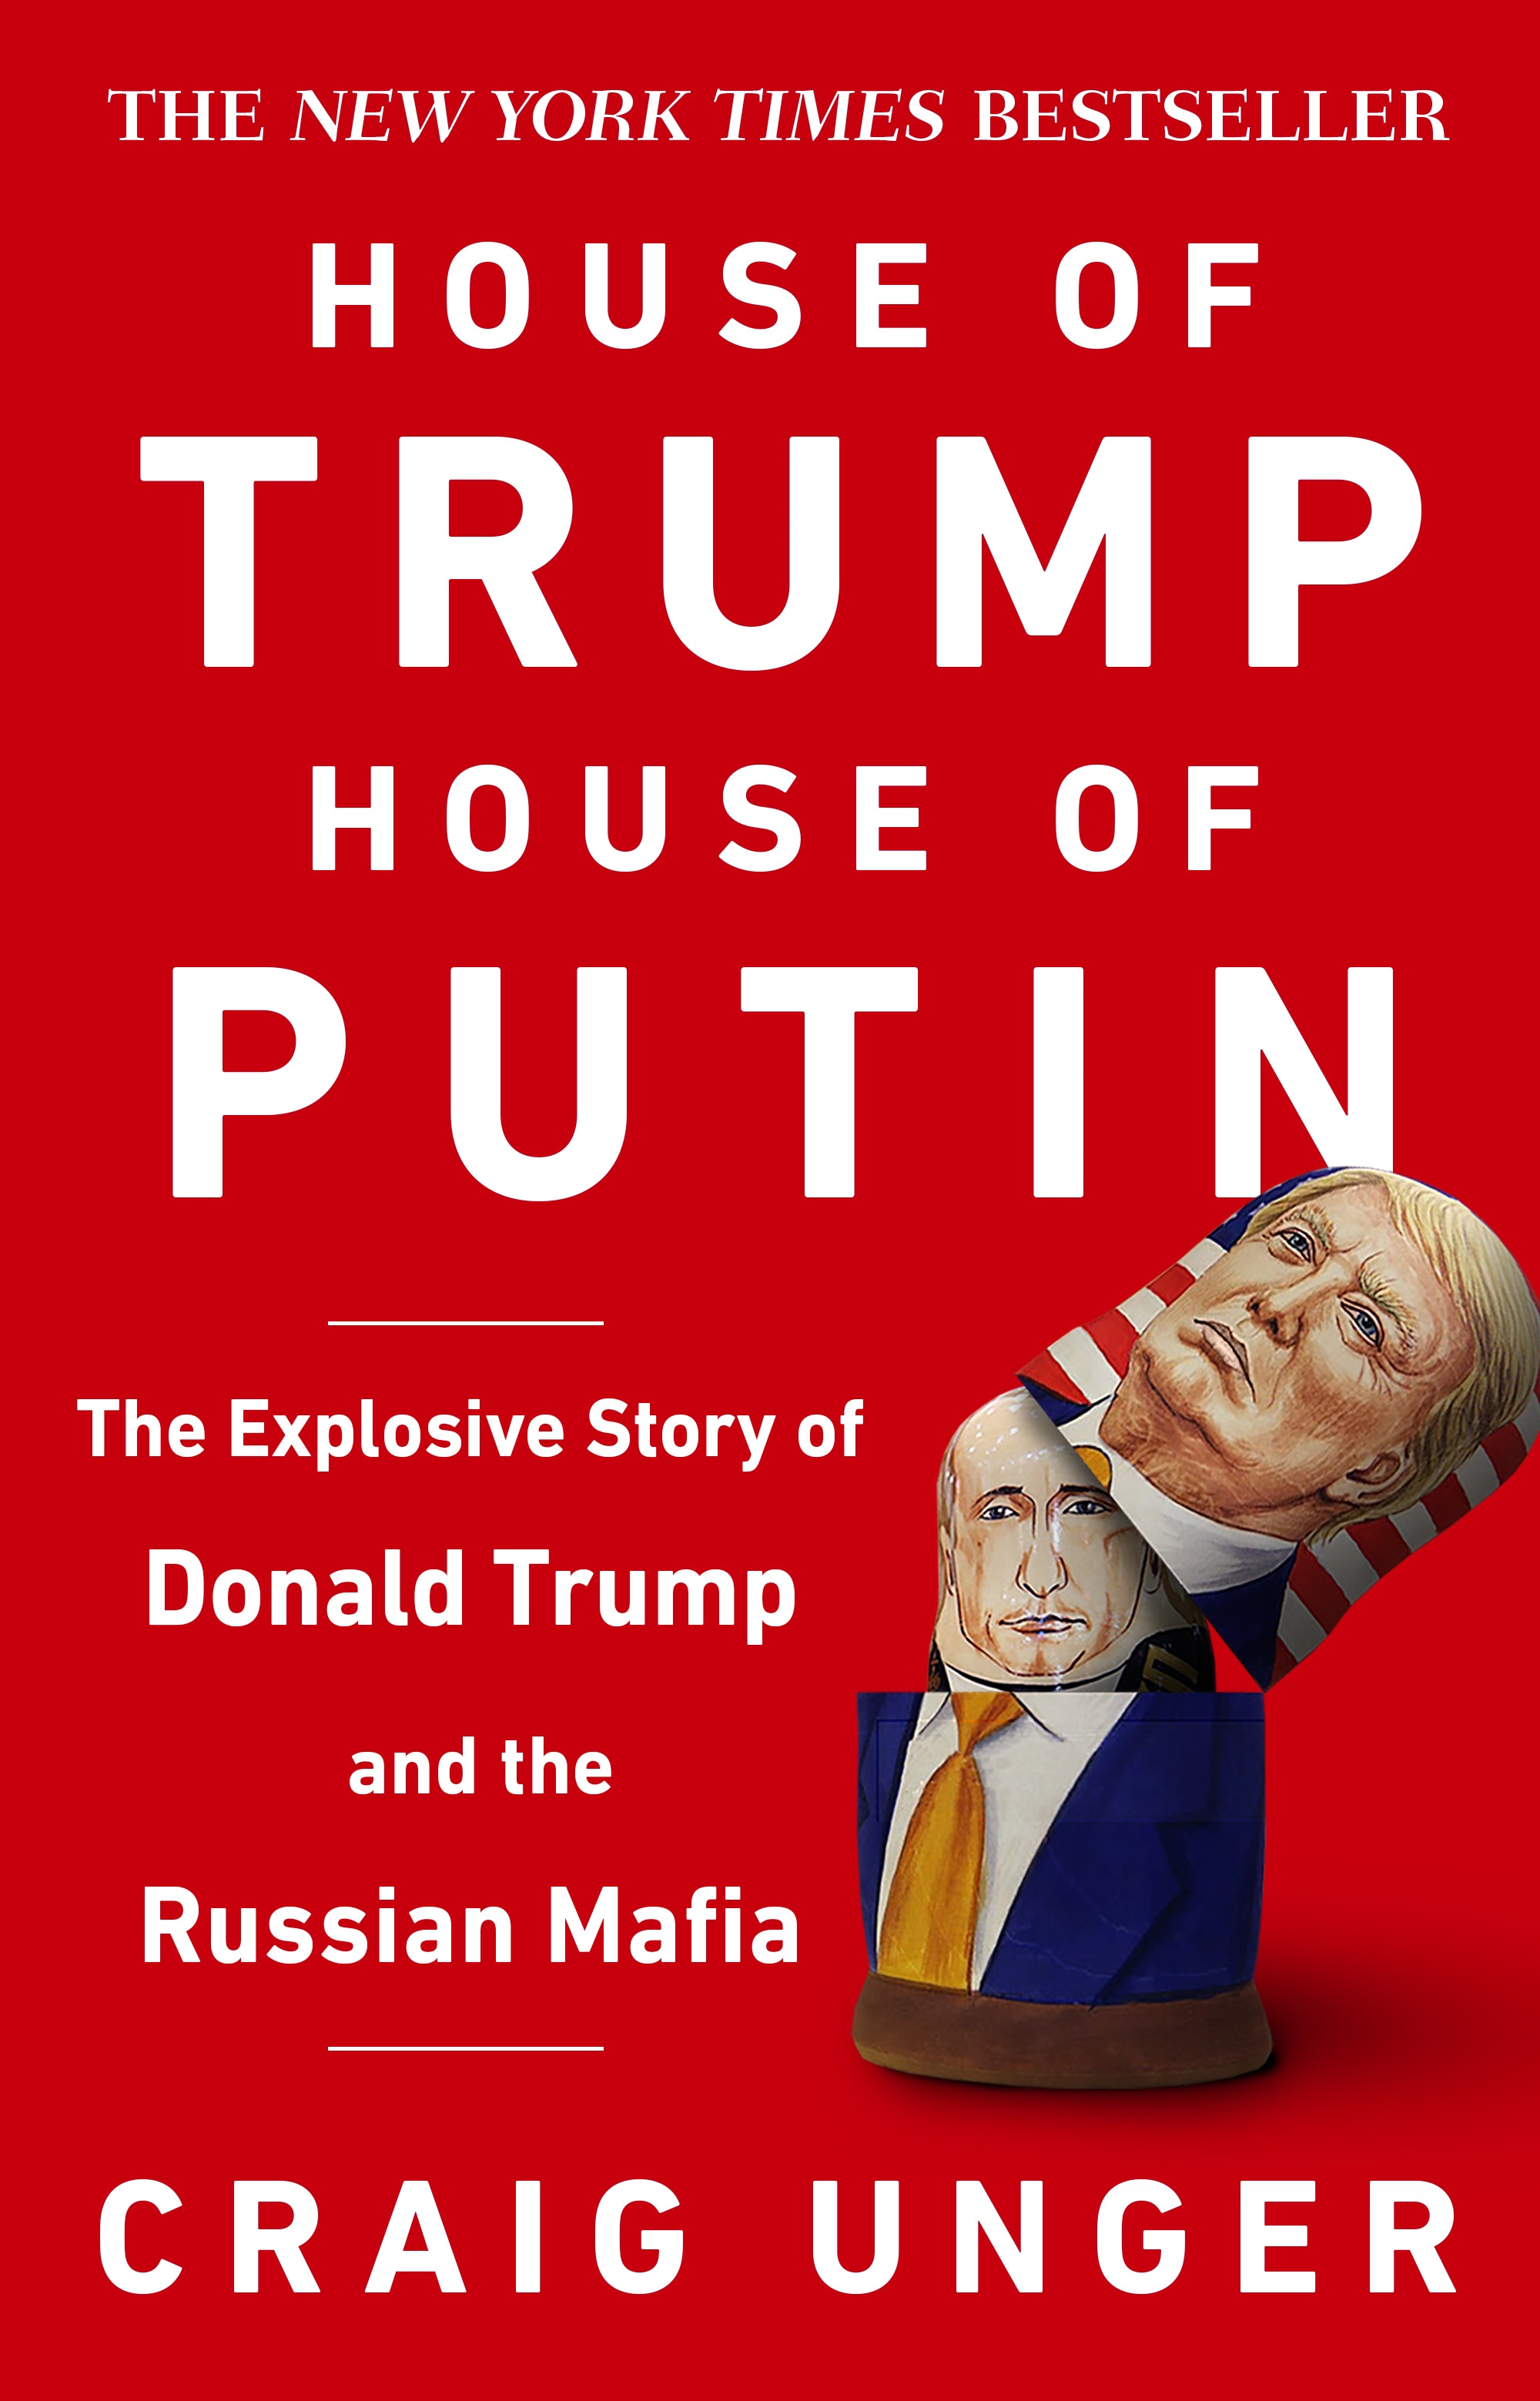 Book “House of Trump, House of Putin” by Craig Unger — May 2, 2019